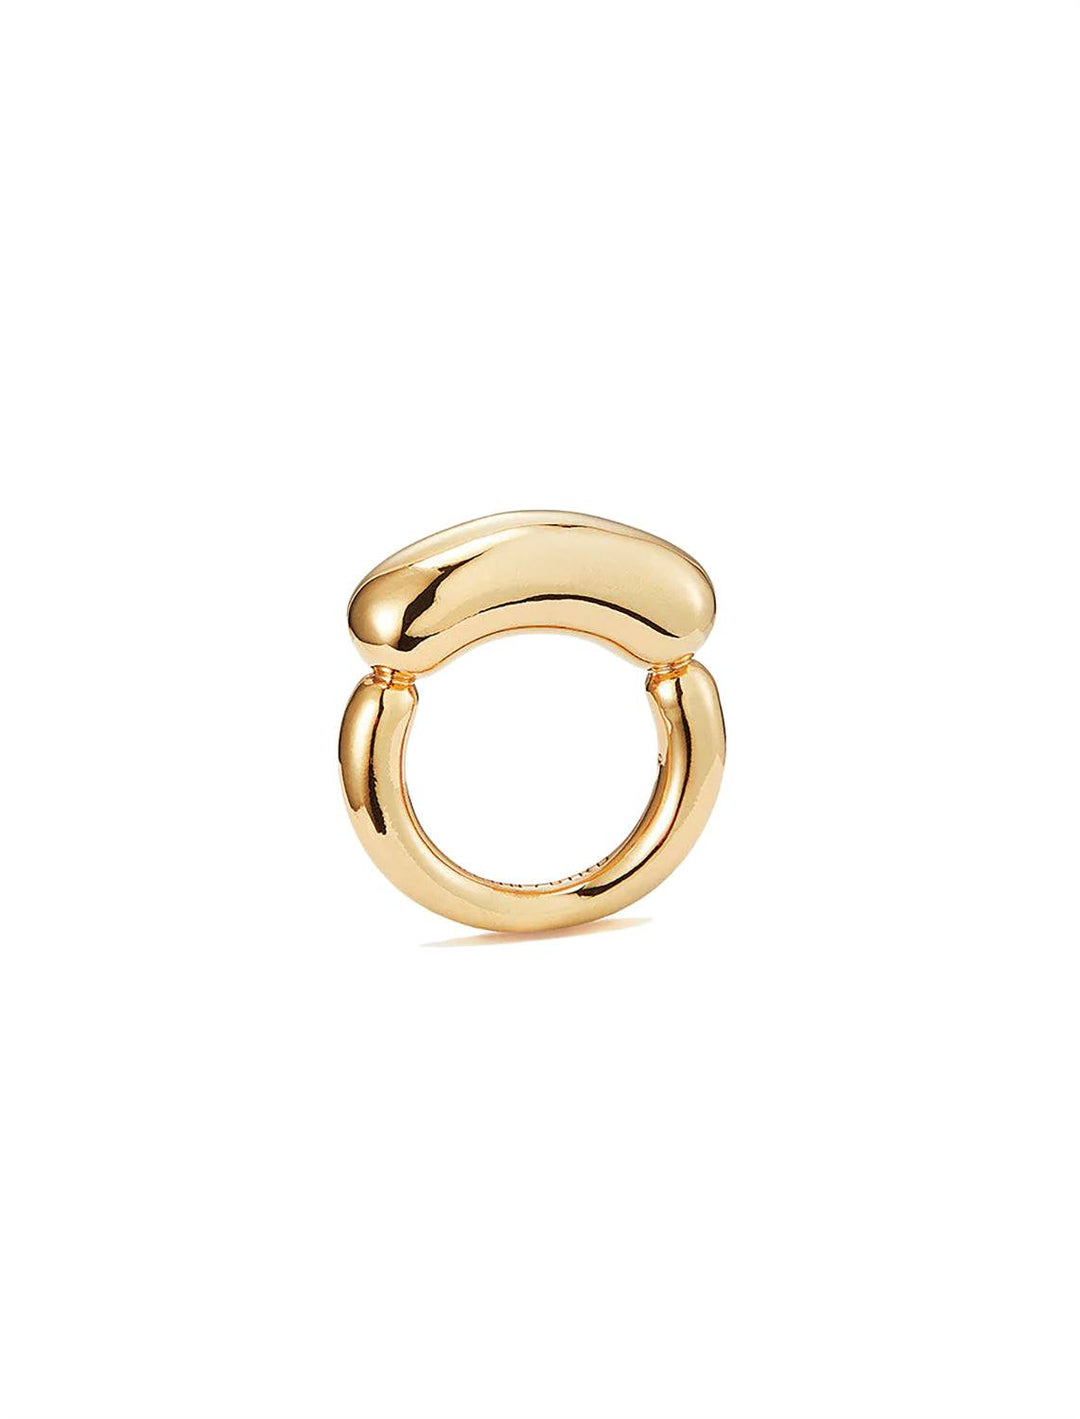 Front Angle of Jenny Bird's Izabella Ring in Gold-Ion Plated Brass.